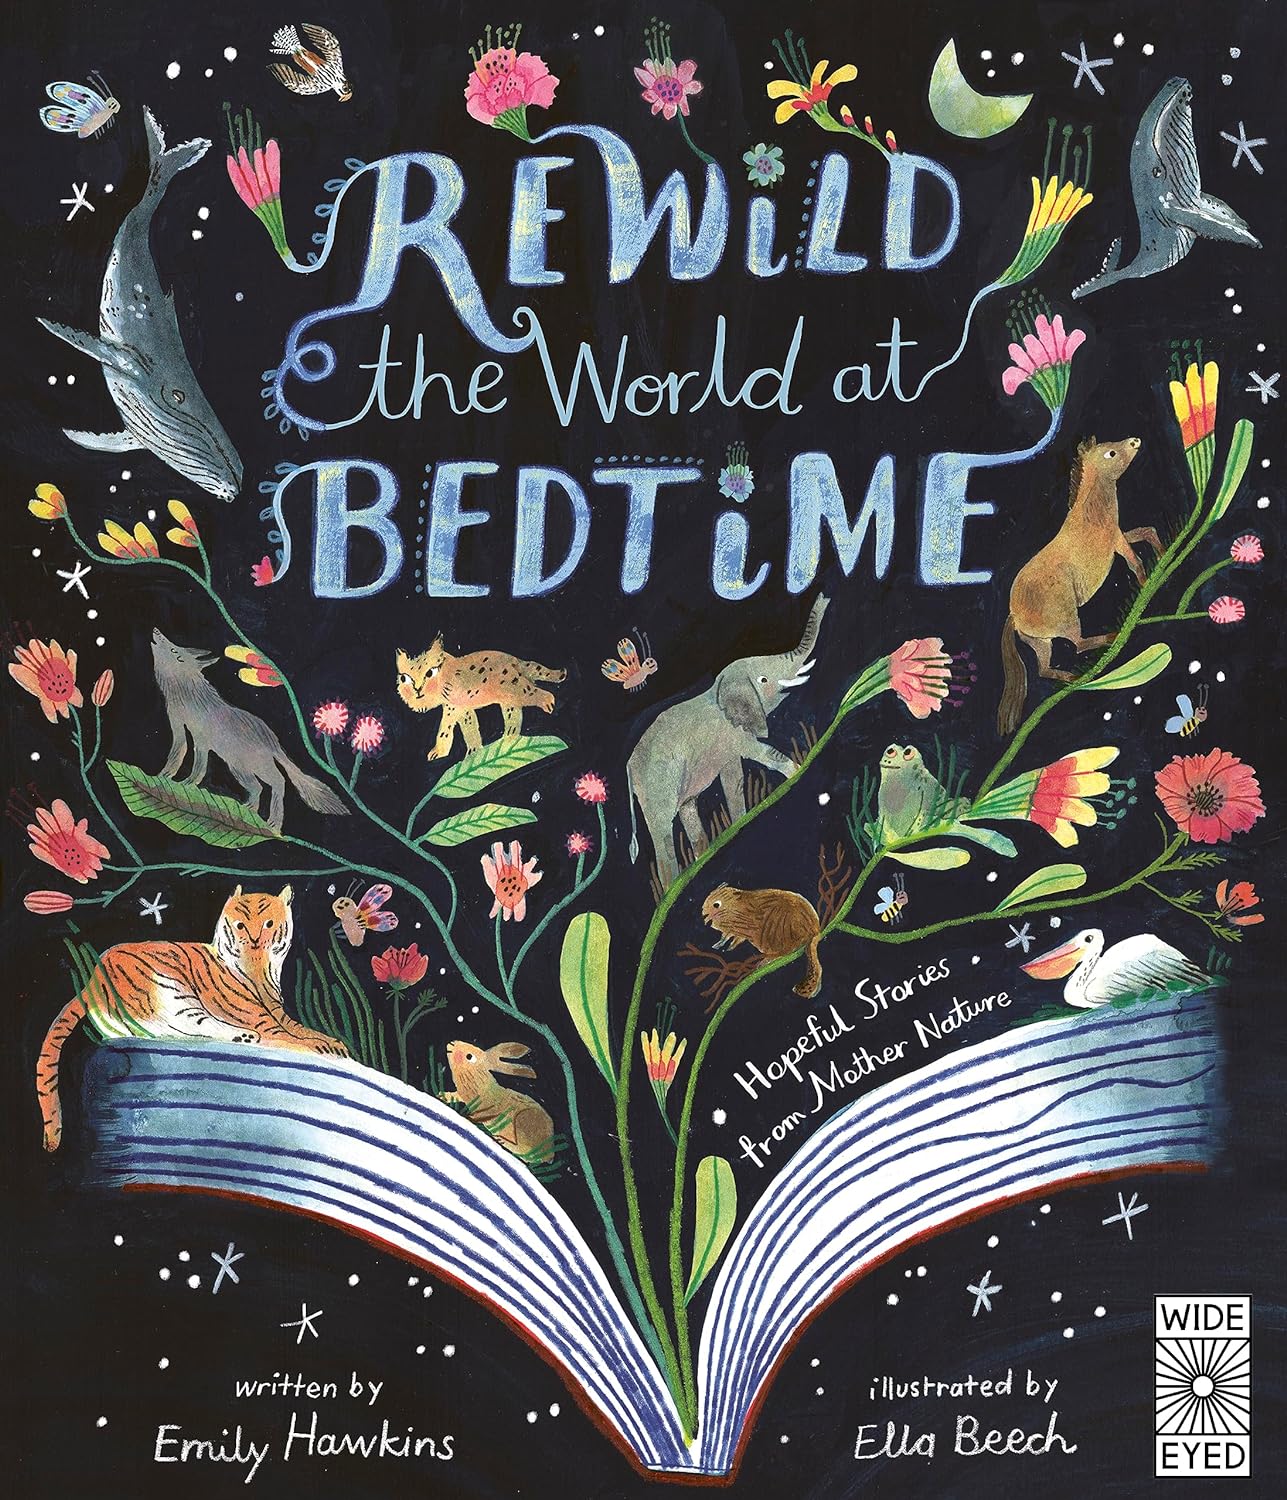 beautiful bedtime stories (inspired by nature)